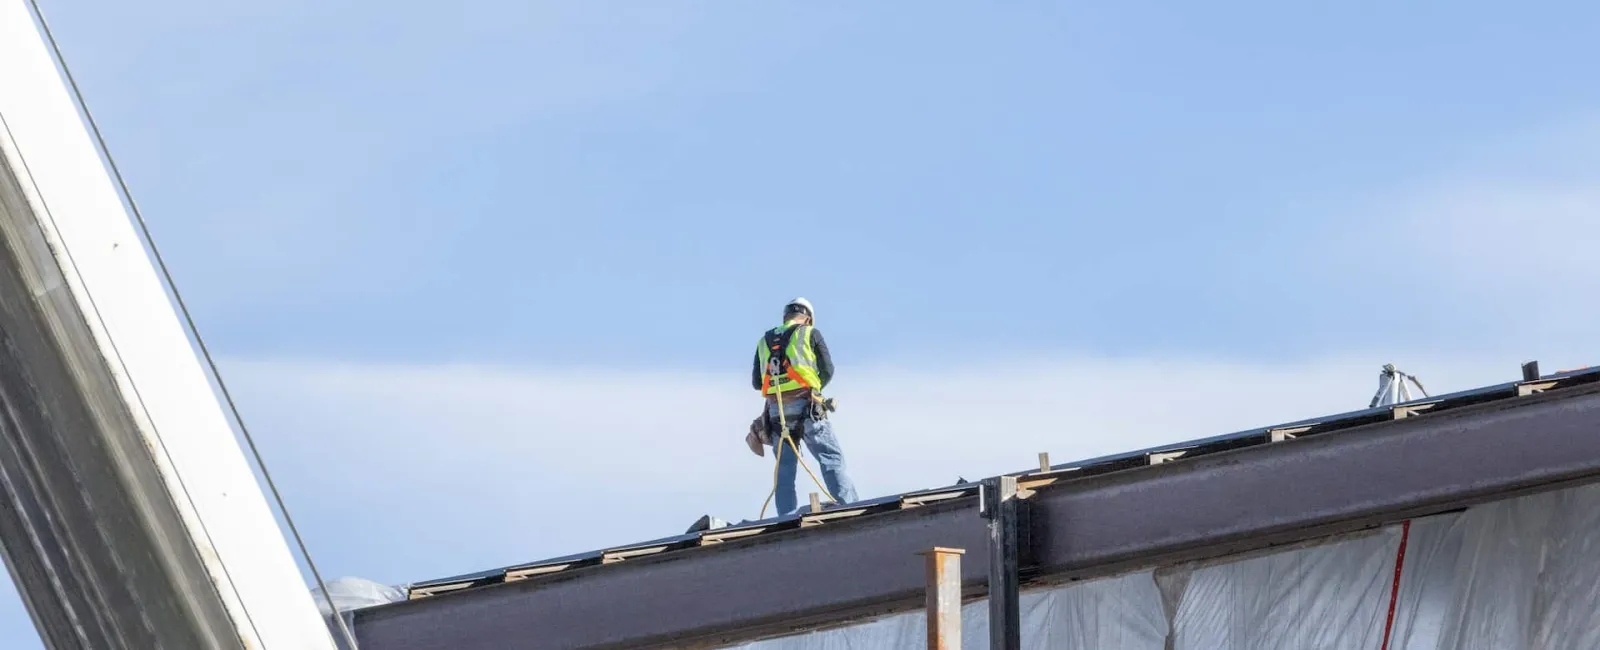 What to Look For When Hiring the Right Roofing Contractor For You